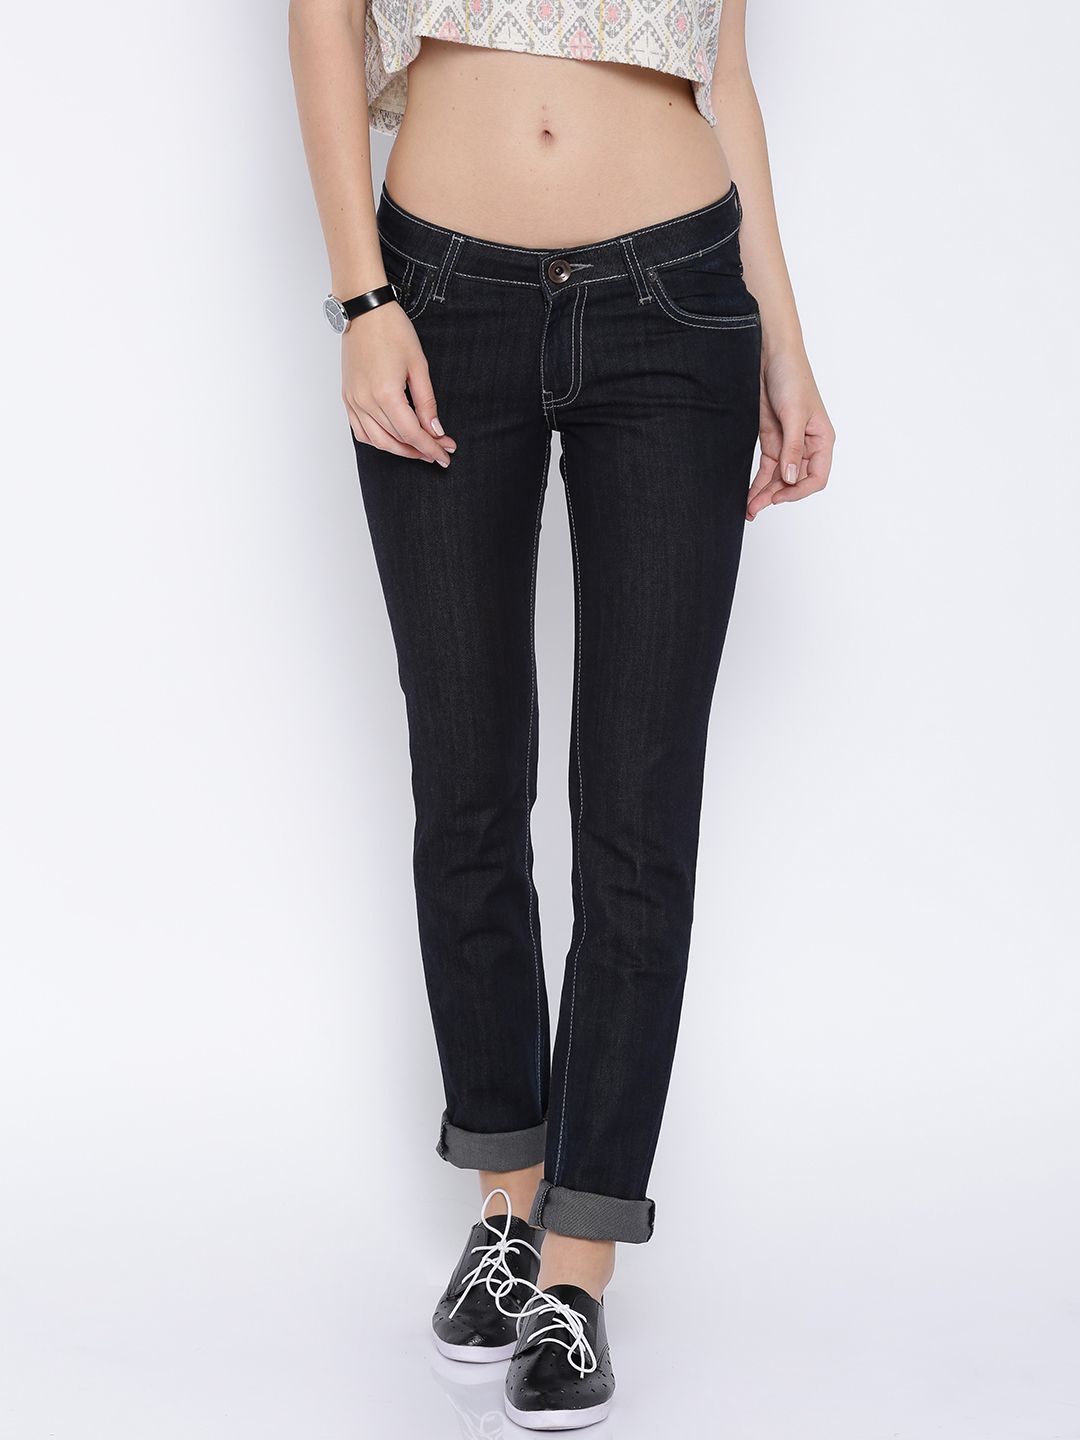 Pepe Jeans Black Frisky Fit Jeans Price in India